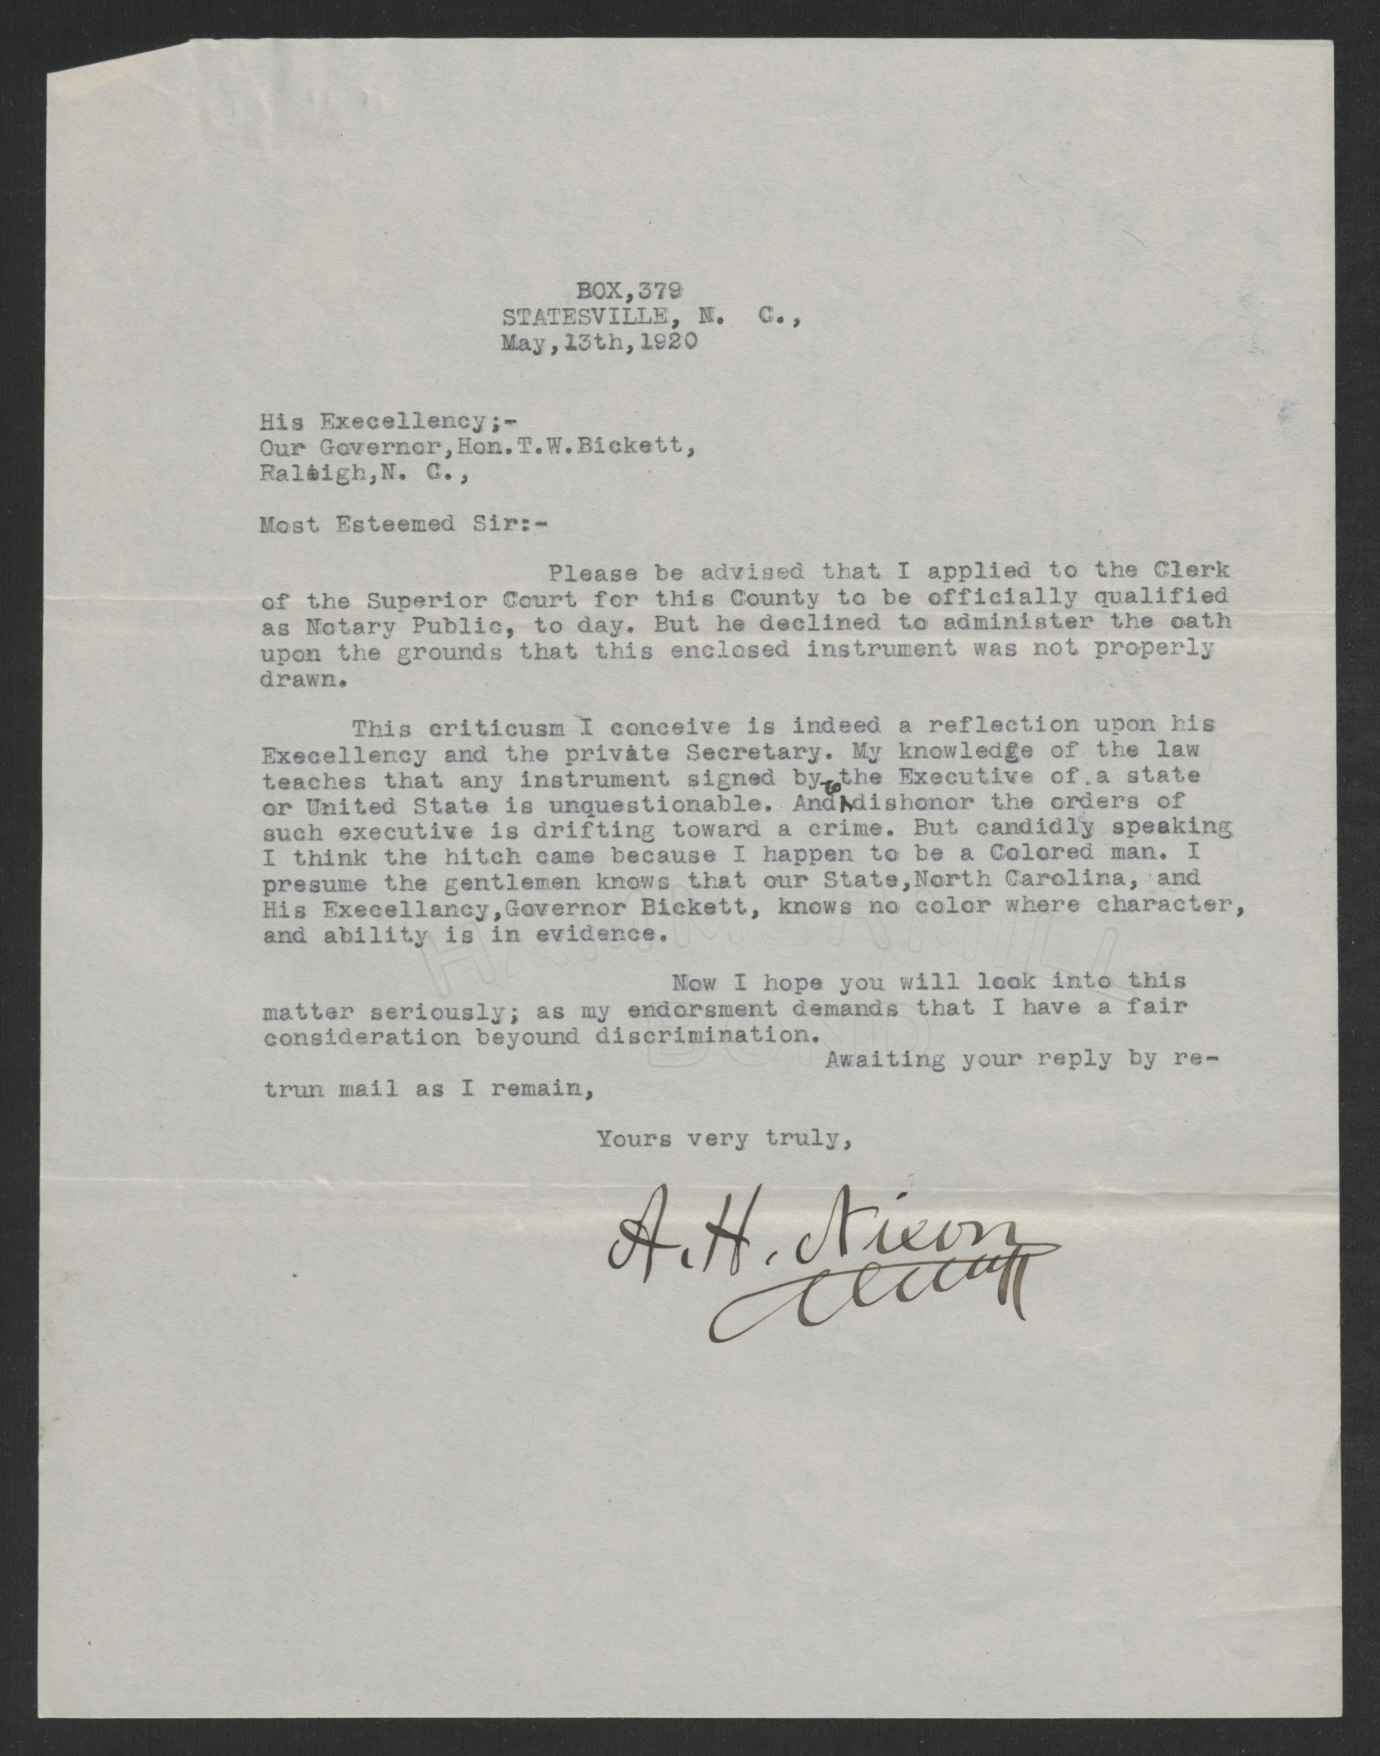 Letter from A. H. Nixon to Thomas W. Bickett, May 13, 1920